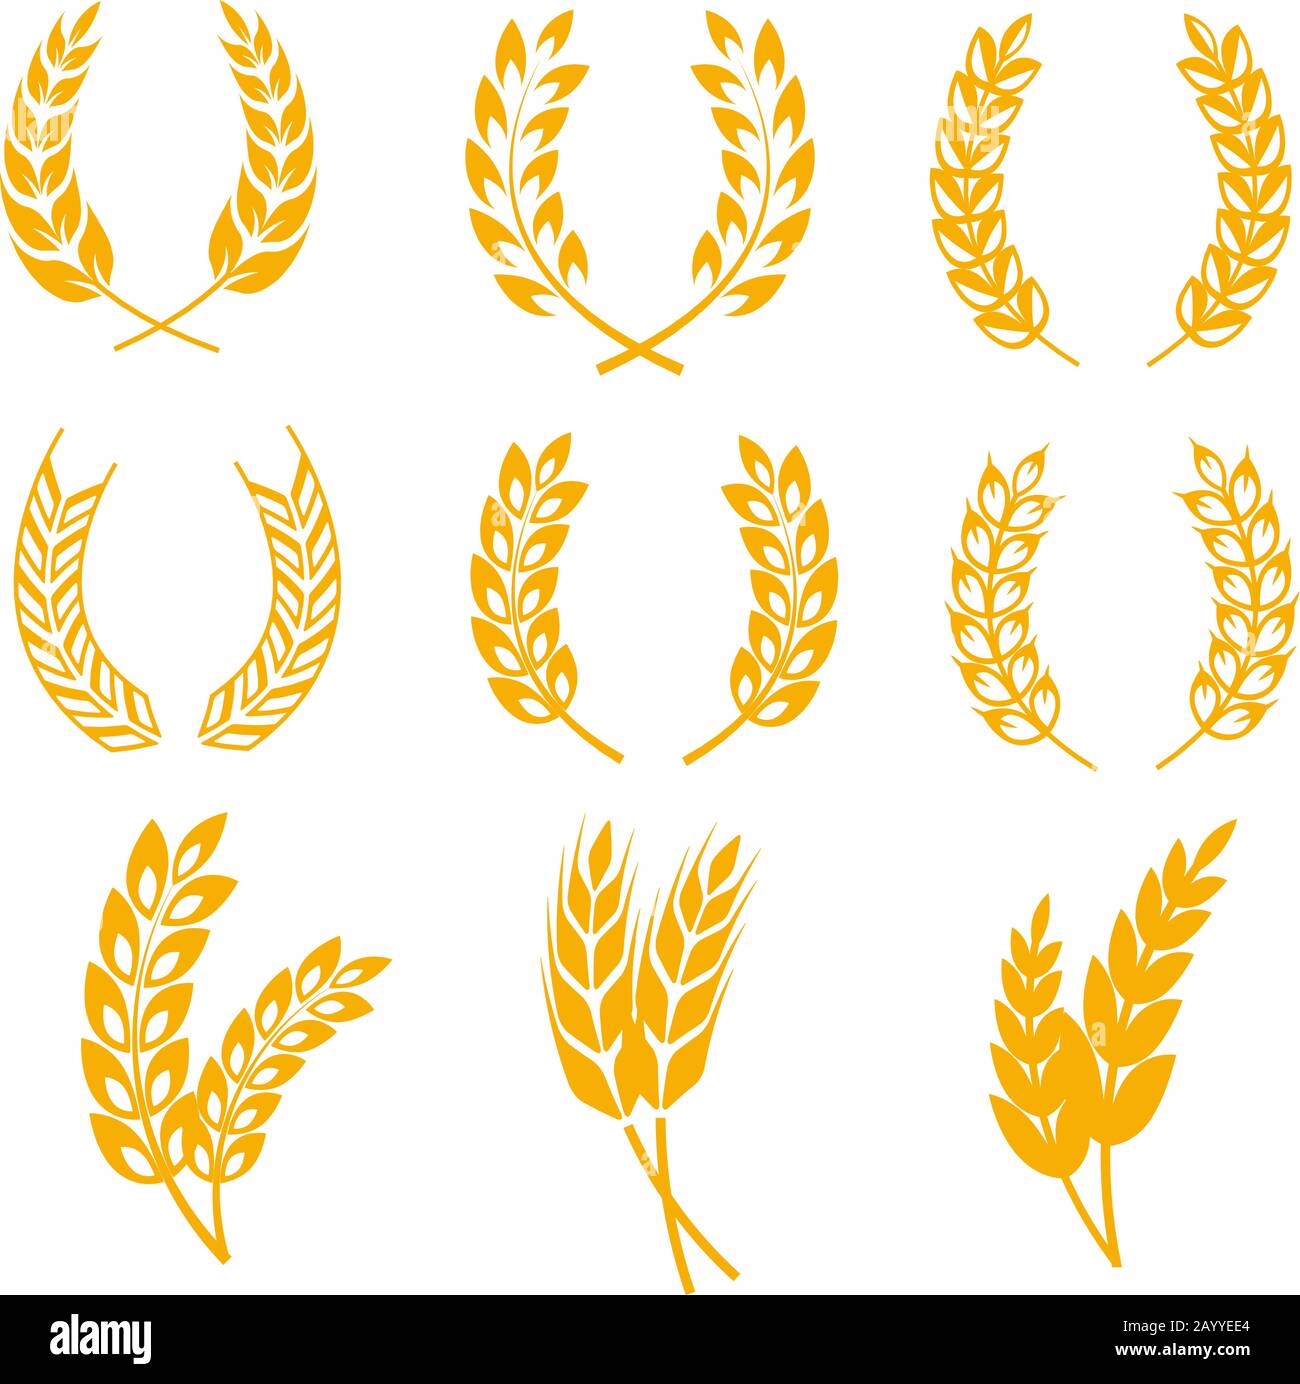 Rye wheat ears wreaths vector elements for bread and beer labels and logos. Harvest cereal golden rye illustration Stock Vector